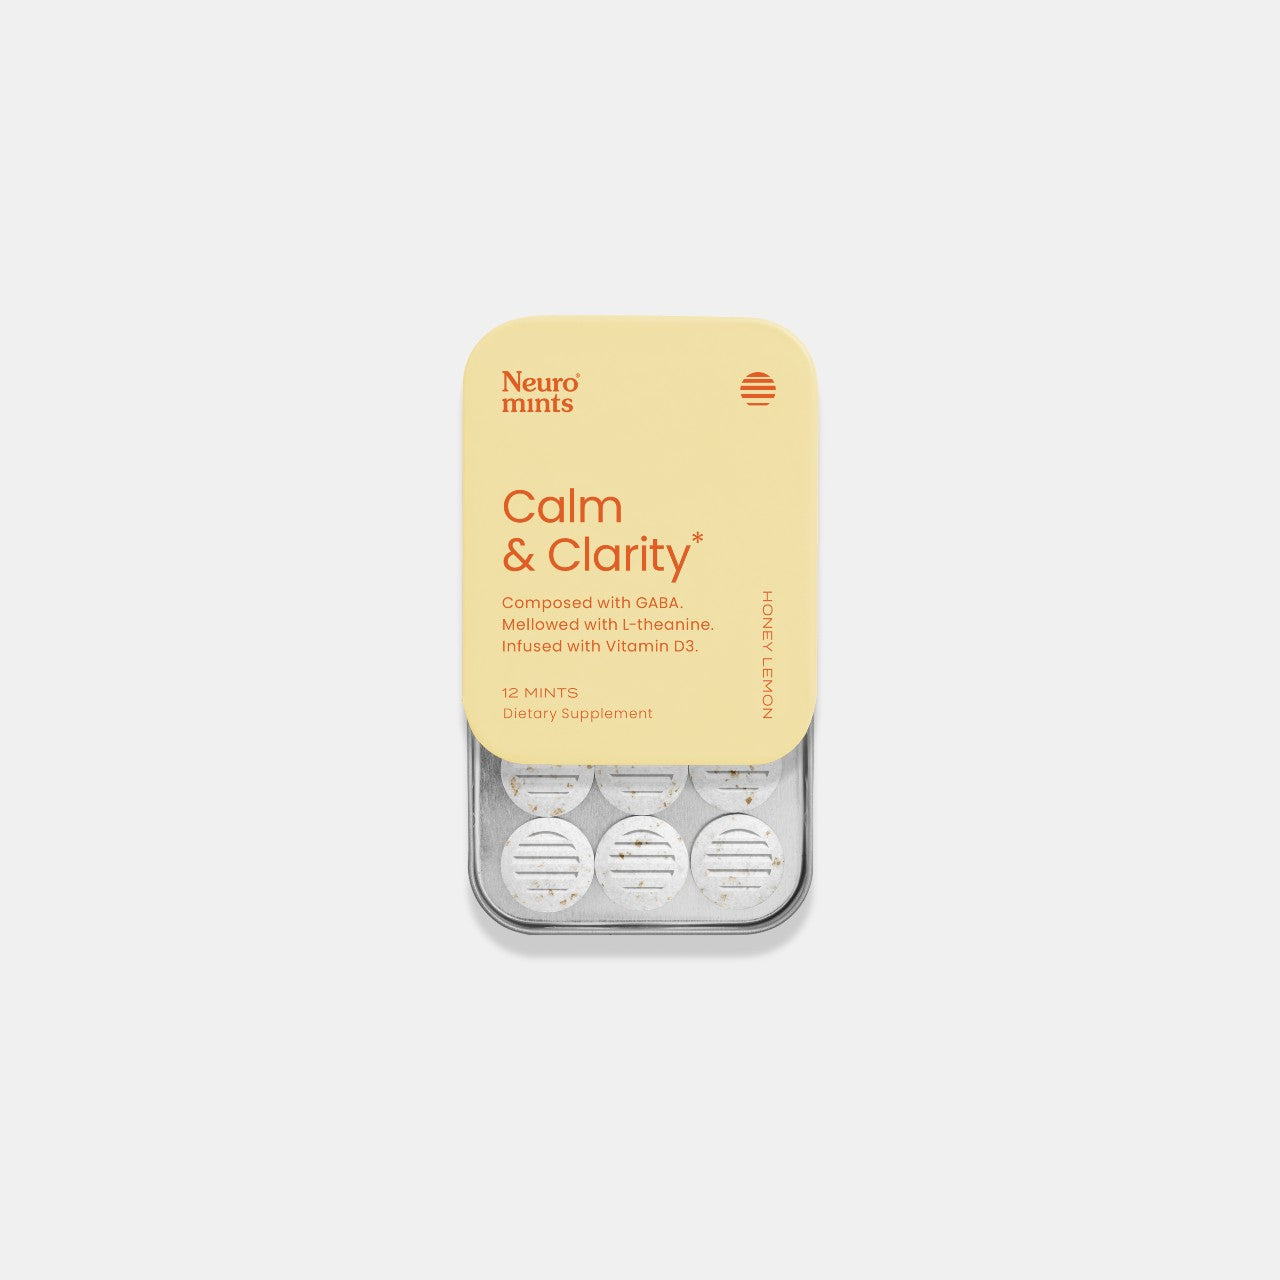 Neuro Mints | GABA + L-theanine + Vitamin D3 | Calm and Clarity Mints by Neuro